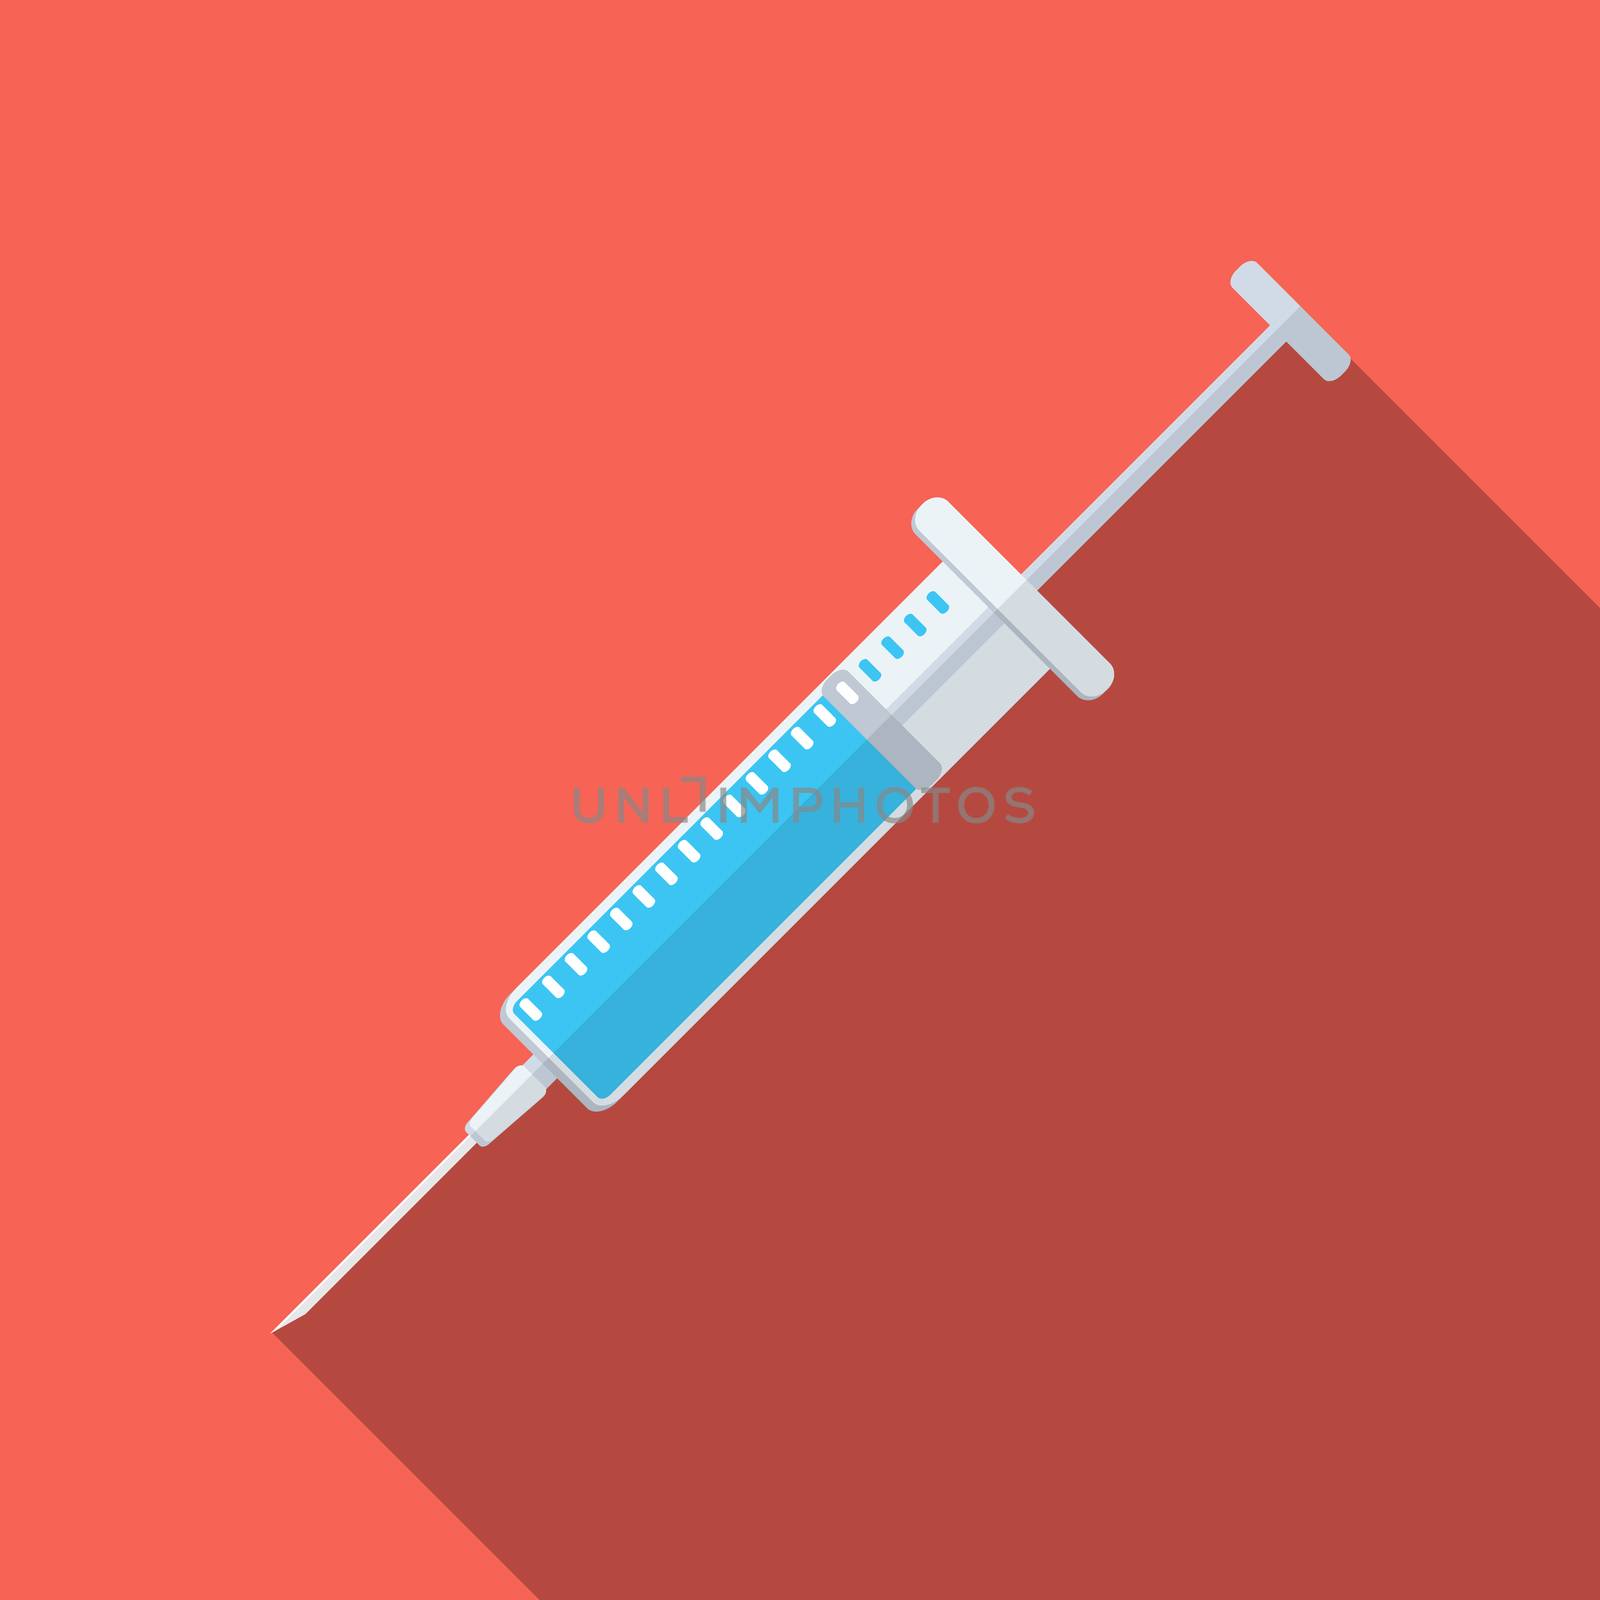 Flat design modern vector illustration of medical syringe icon with long shadow.